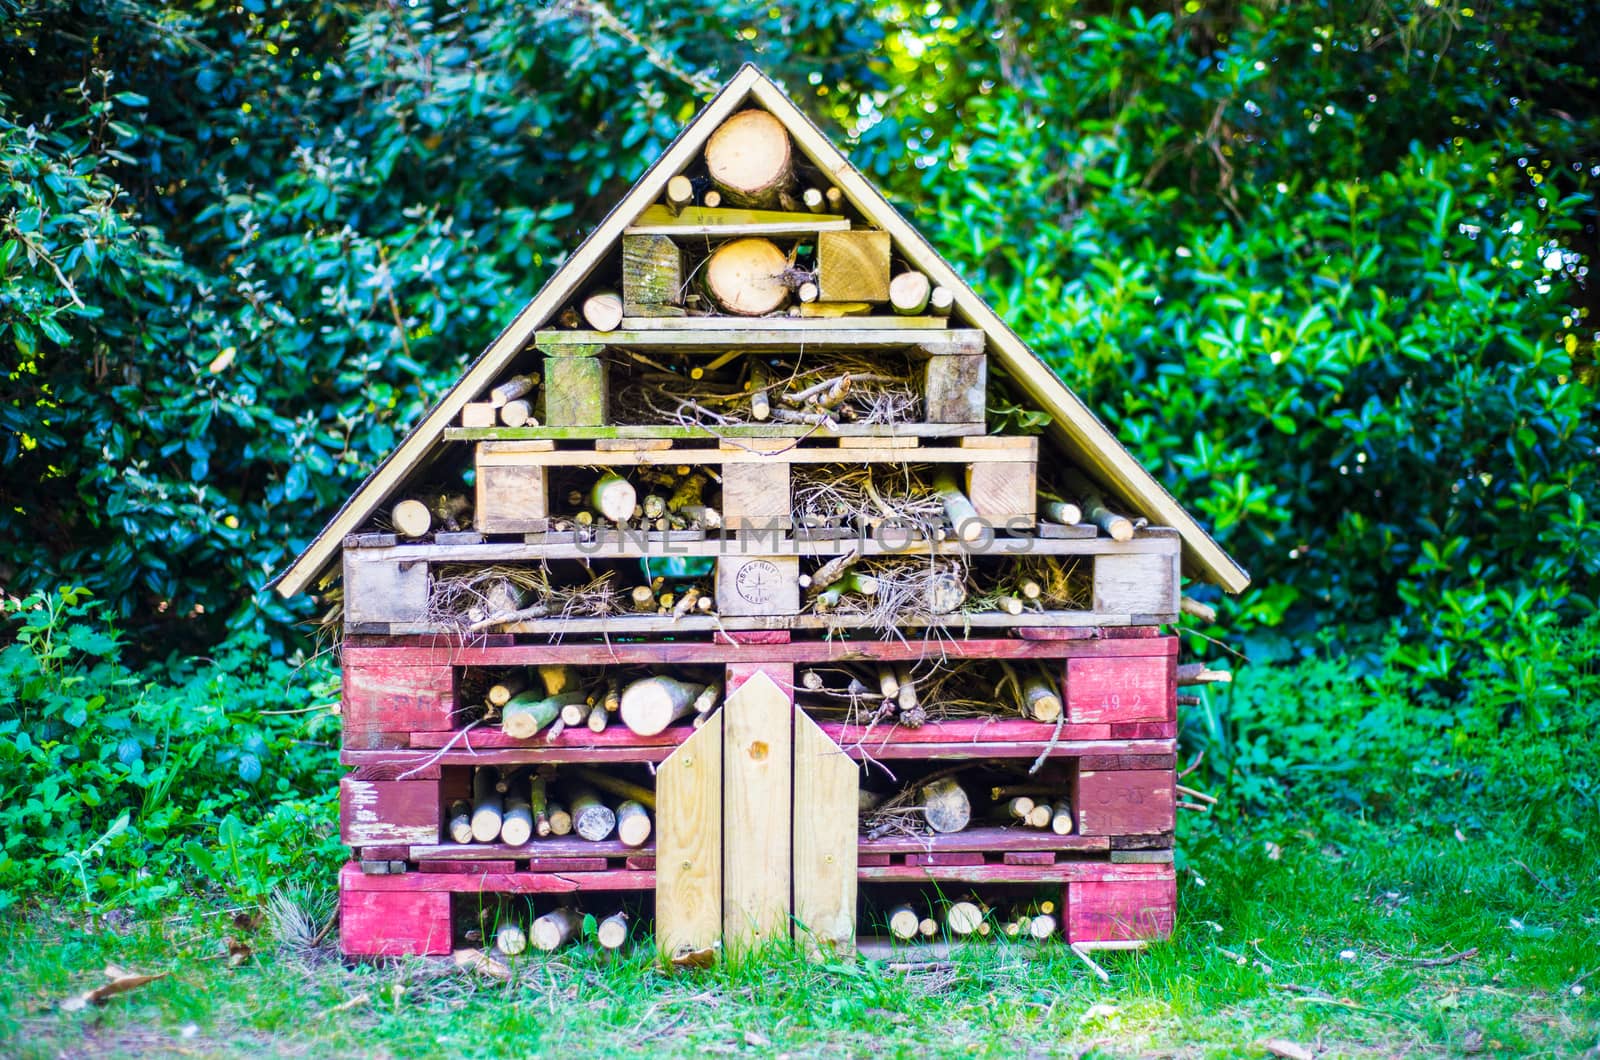 insect hotel decorative wood house with compartments for bugs